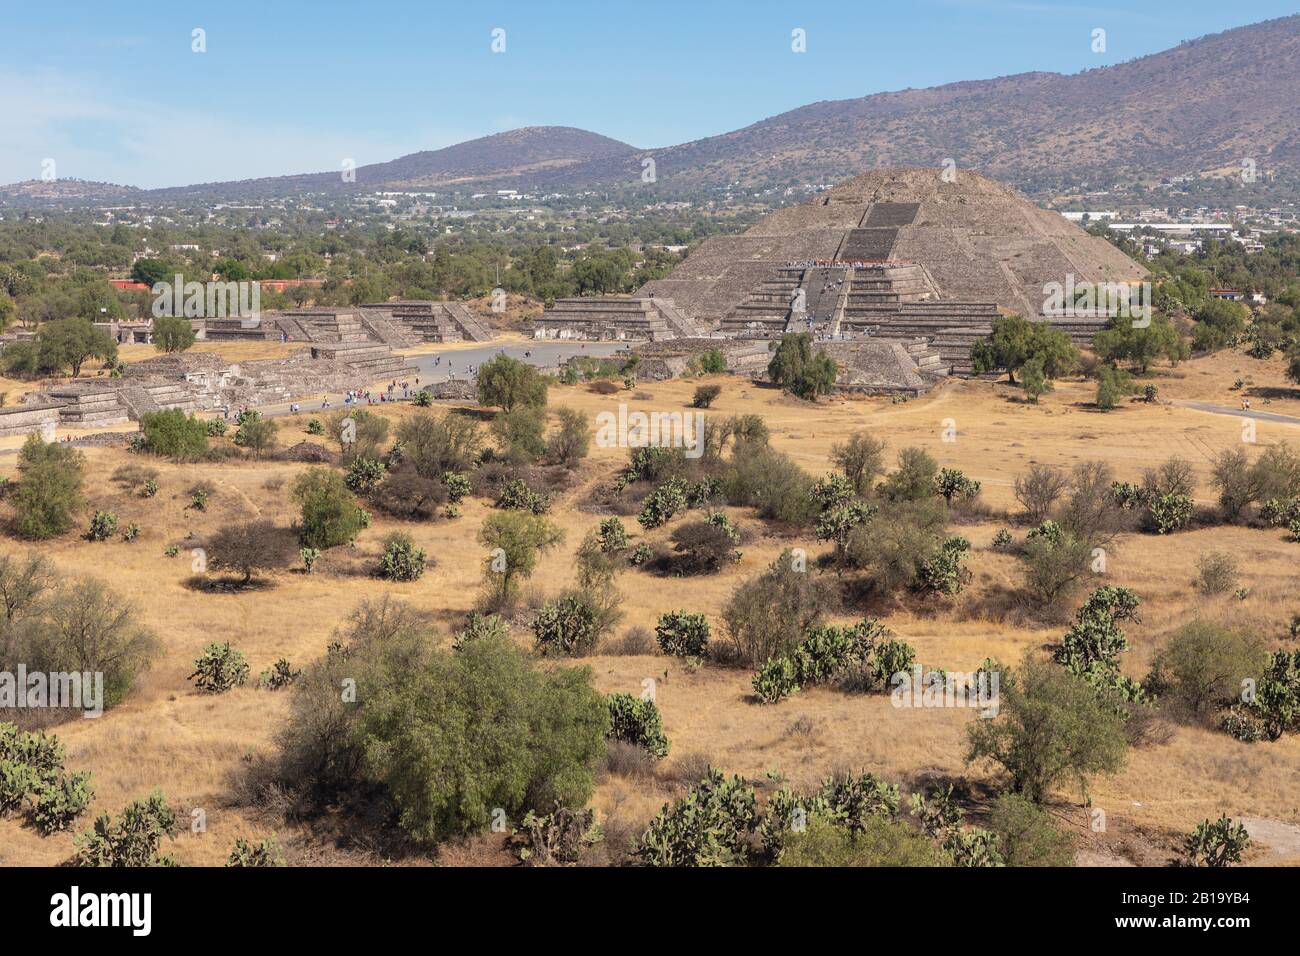 The Pyramids in ancient city of Teotihuacan in Mexico. Stock Photo